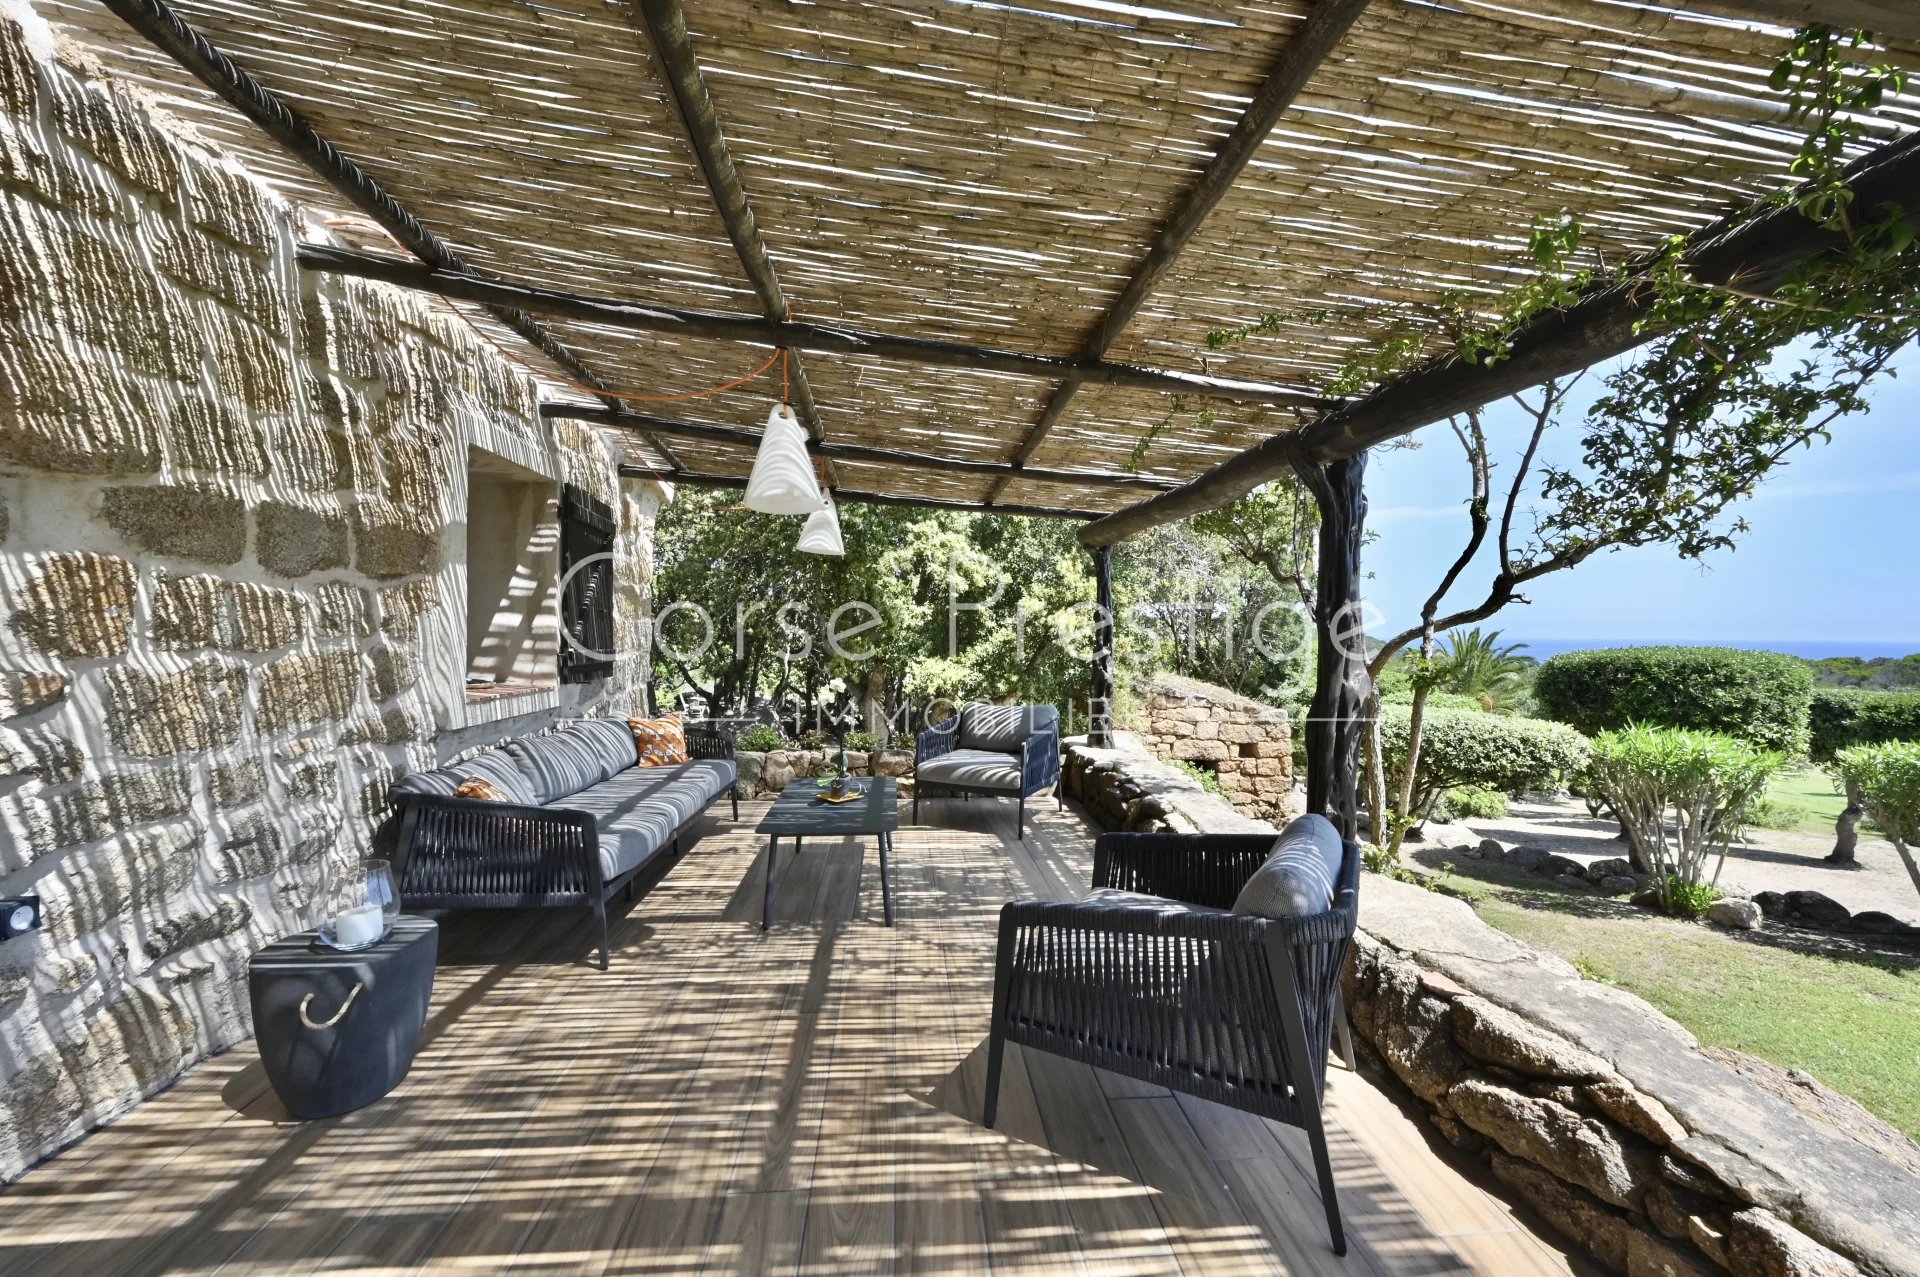 sheepfold to rent in bonifacio - away from prying eyes - south corsica image8